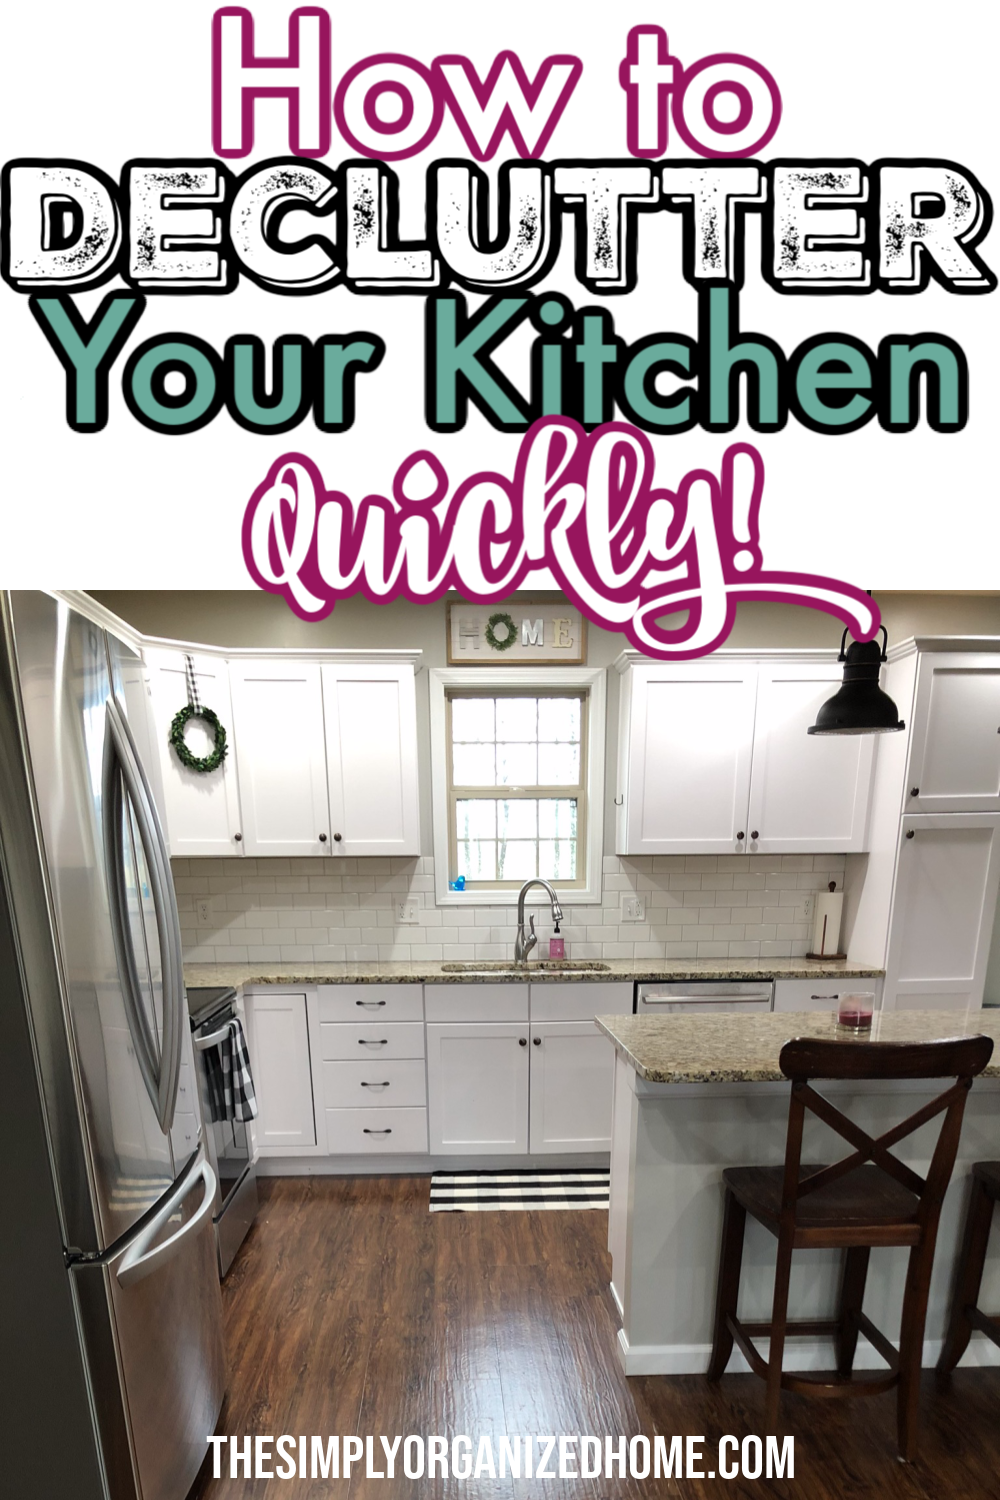 https://www.thesimplyorganizedhome.com/wp-content/uploads/2020/02/How-to-Declutter-Your-Kitchen-Quickly.png